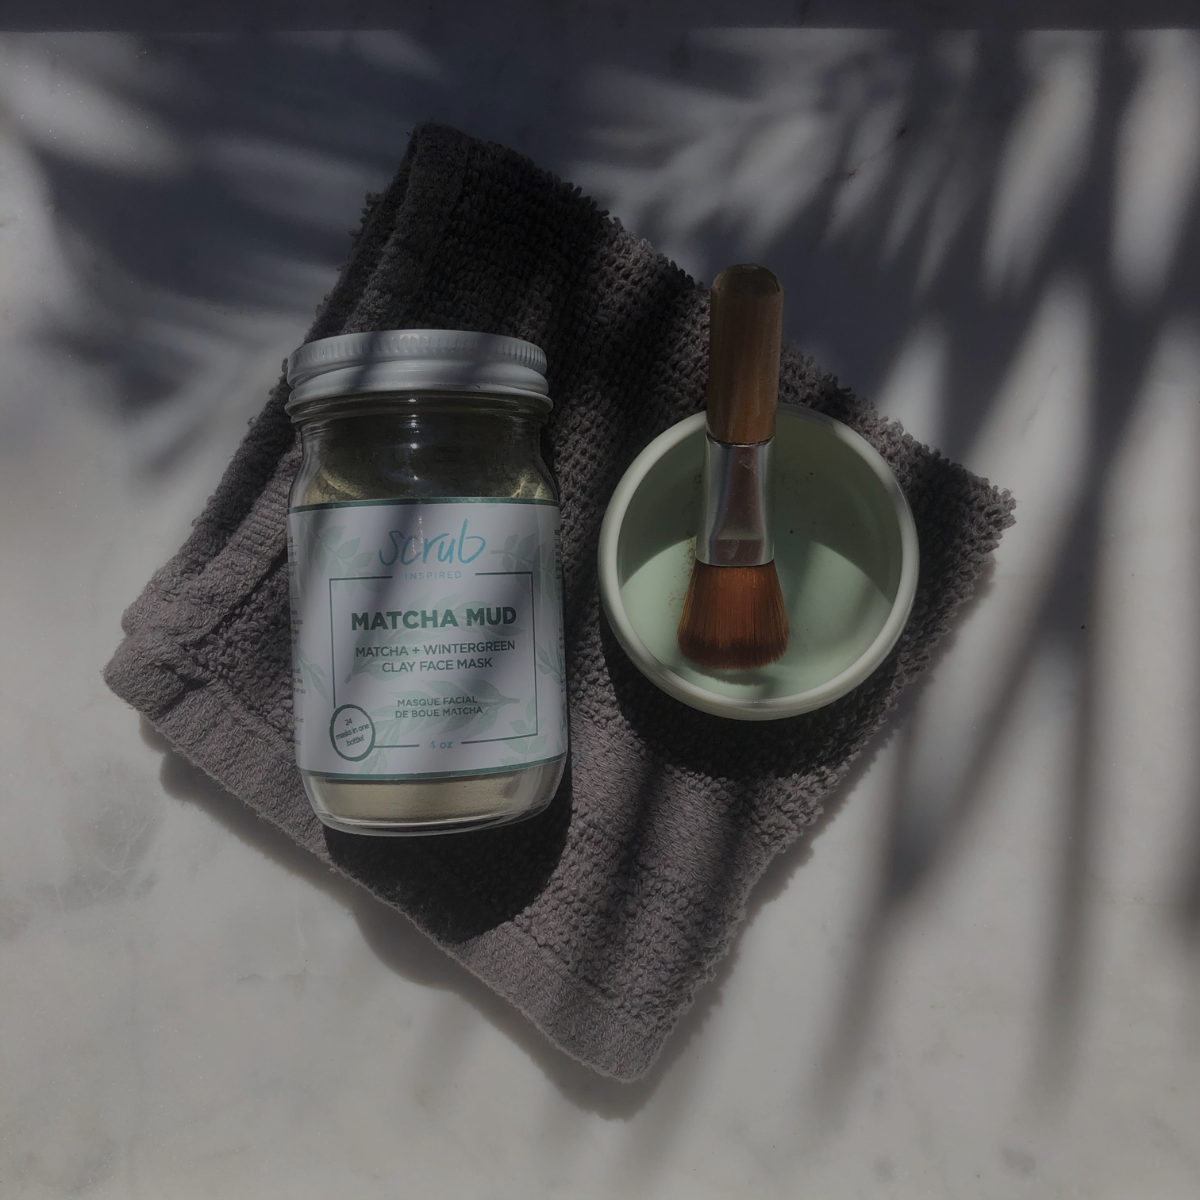 Skin care bundles made with all-natural, vegan, and cruelty-free ingredients. Scrub Inspired handmakes products in Cape Breton, Canada. Save on bundles.